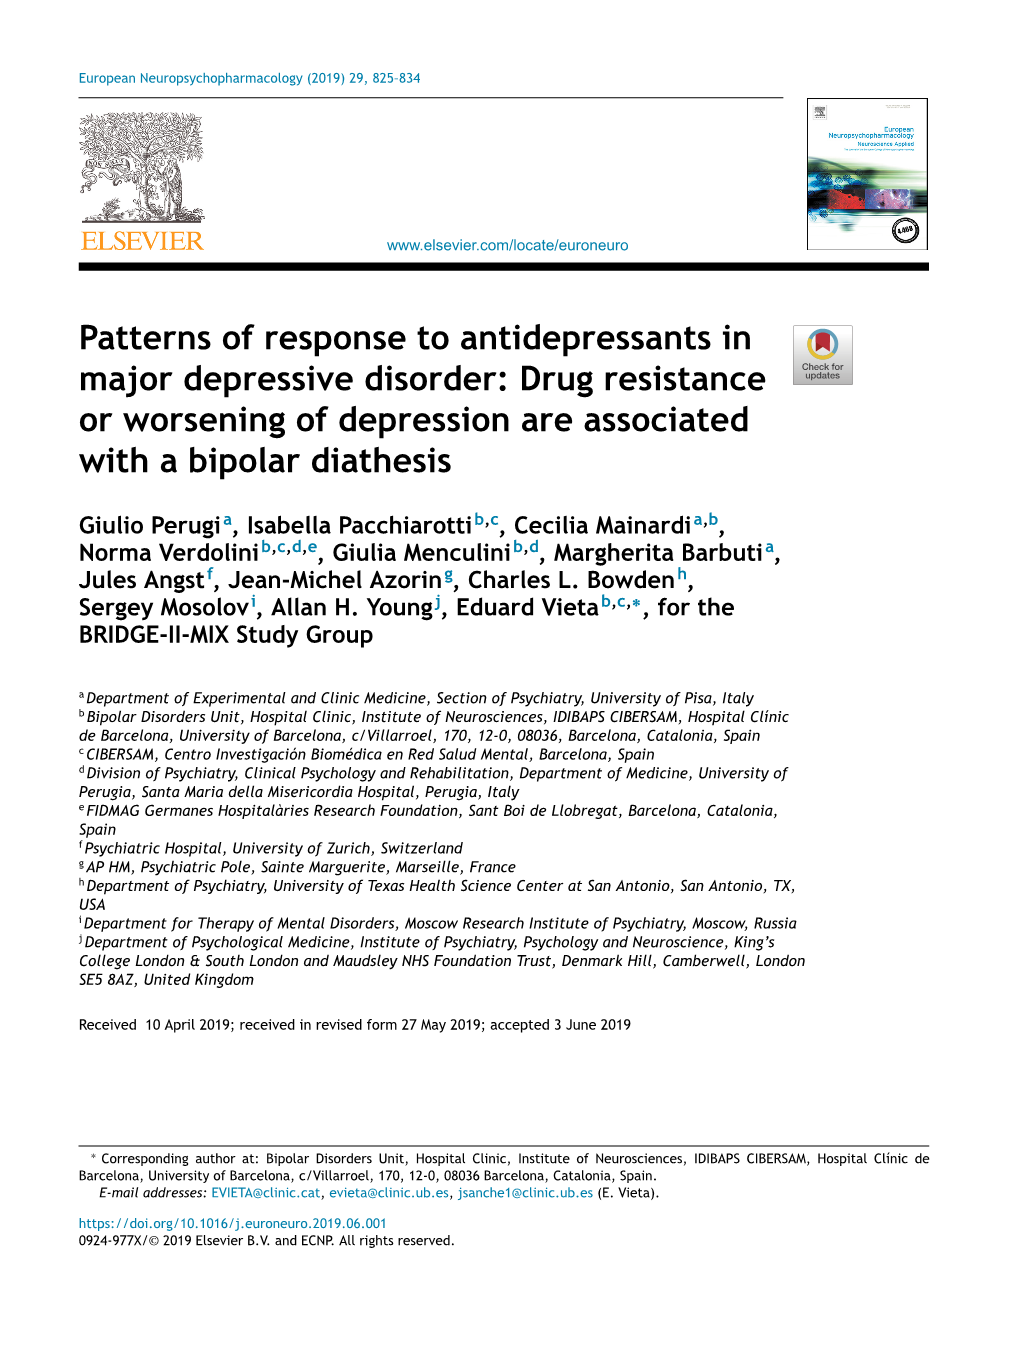 Patterns of Response to Antidepressants in Major Depressive Disorder: Drug Resistance Or Worsening of Depression Are Associated with a Bipolar Diathesis